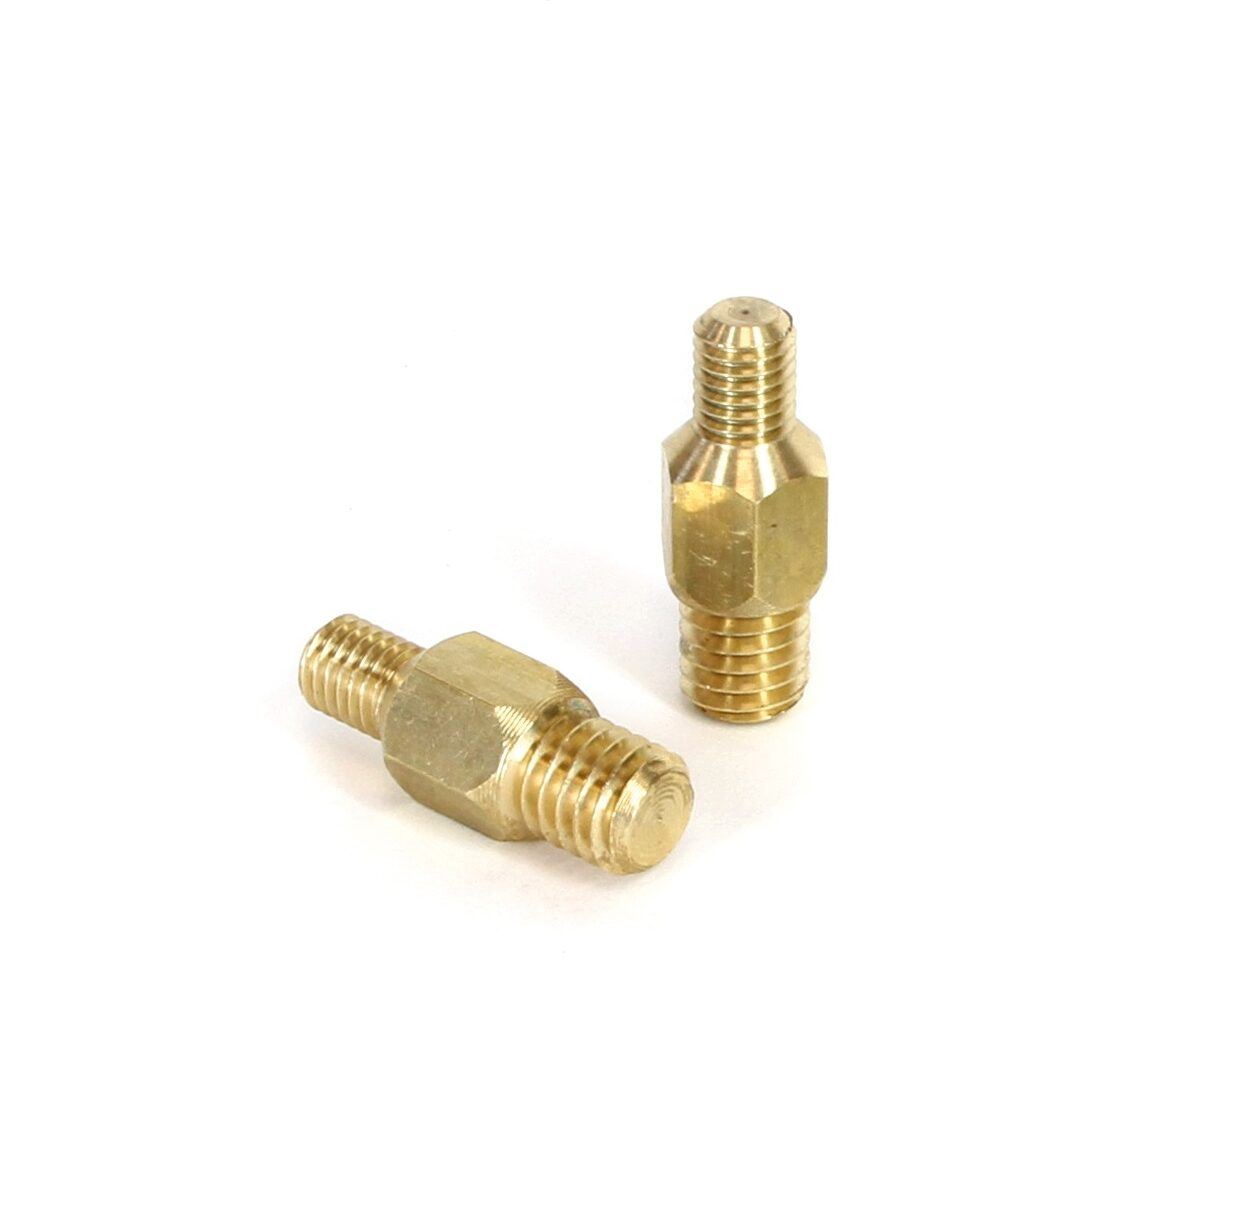 Rod adaptor whitworth to M10 Male FRA09